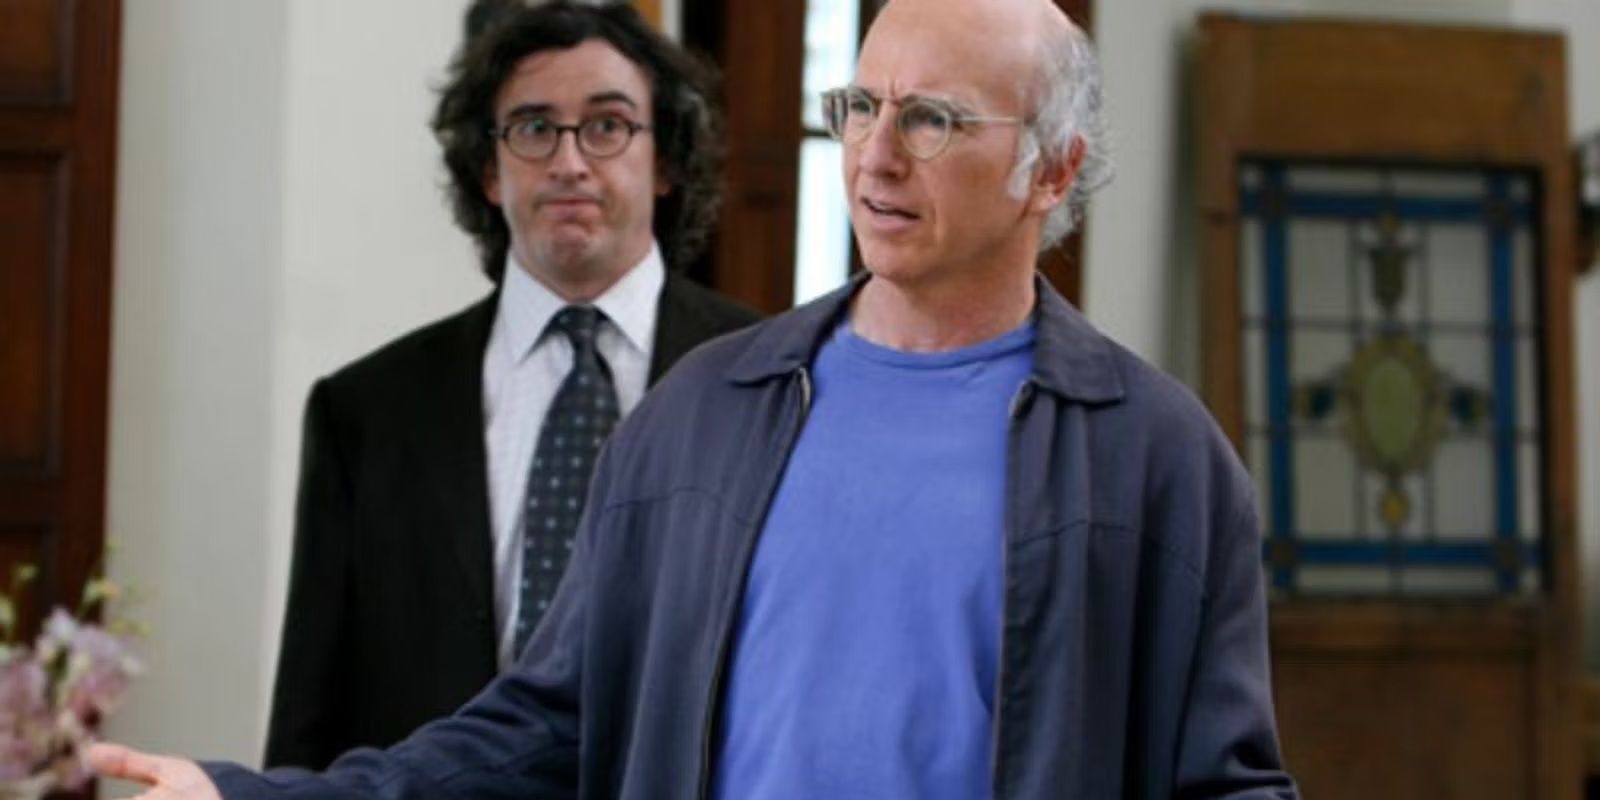 Larry with his therapist Dr Bright in Curb Your Enthusiasm